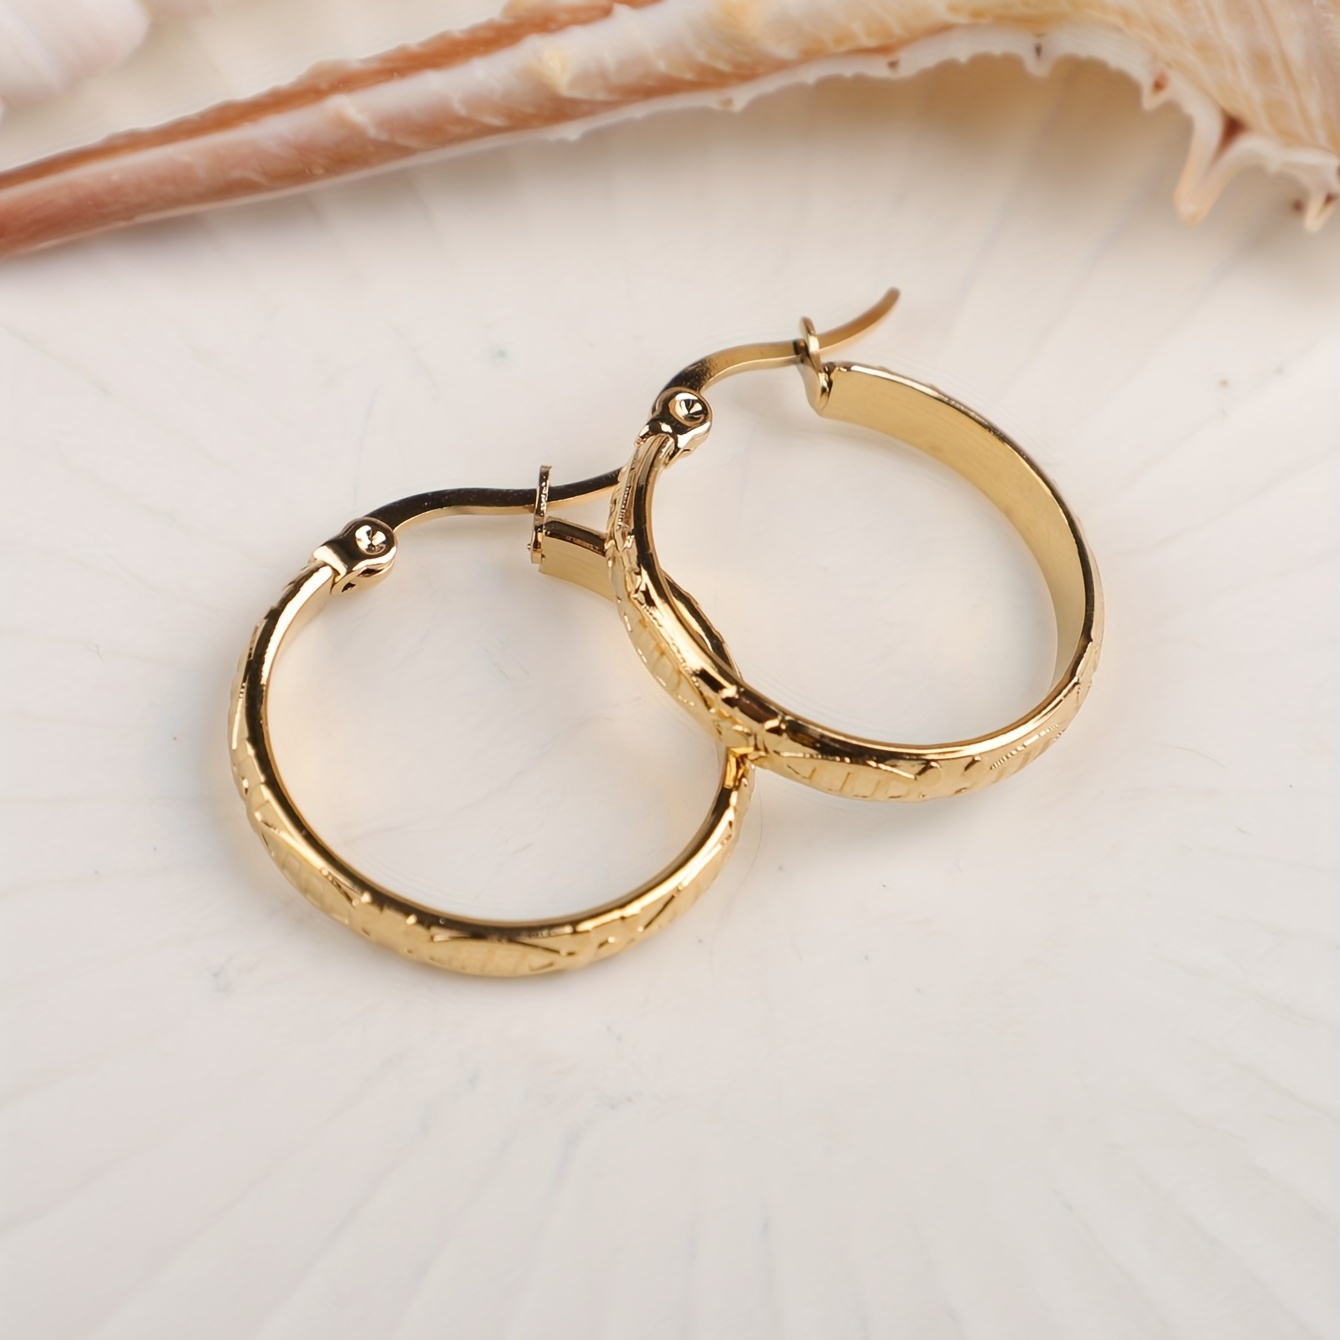 

1 Pair Of Golden Stainless Steel Fish Pattern Circle Earrings For Women Girls Hypoallergenic Ear Jewelry Christmas, Halloween, Thanksgiving Gift